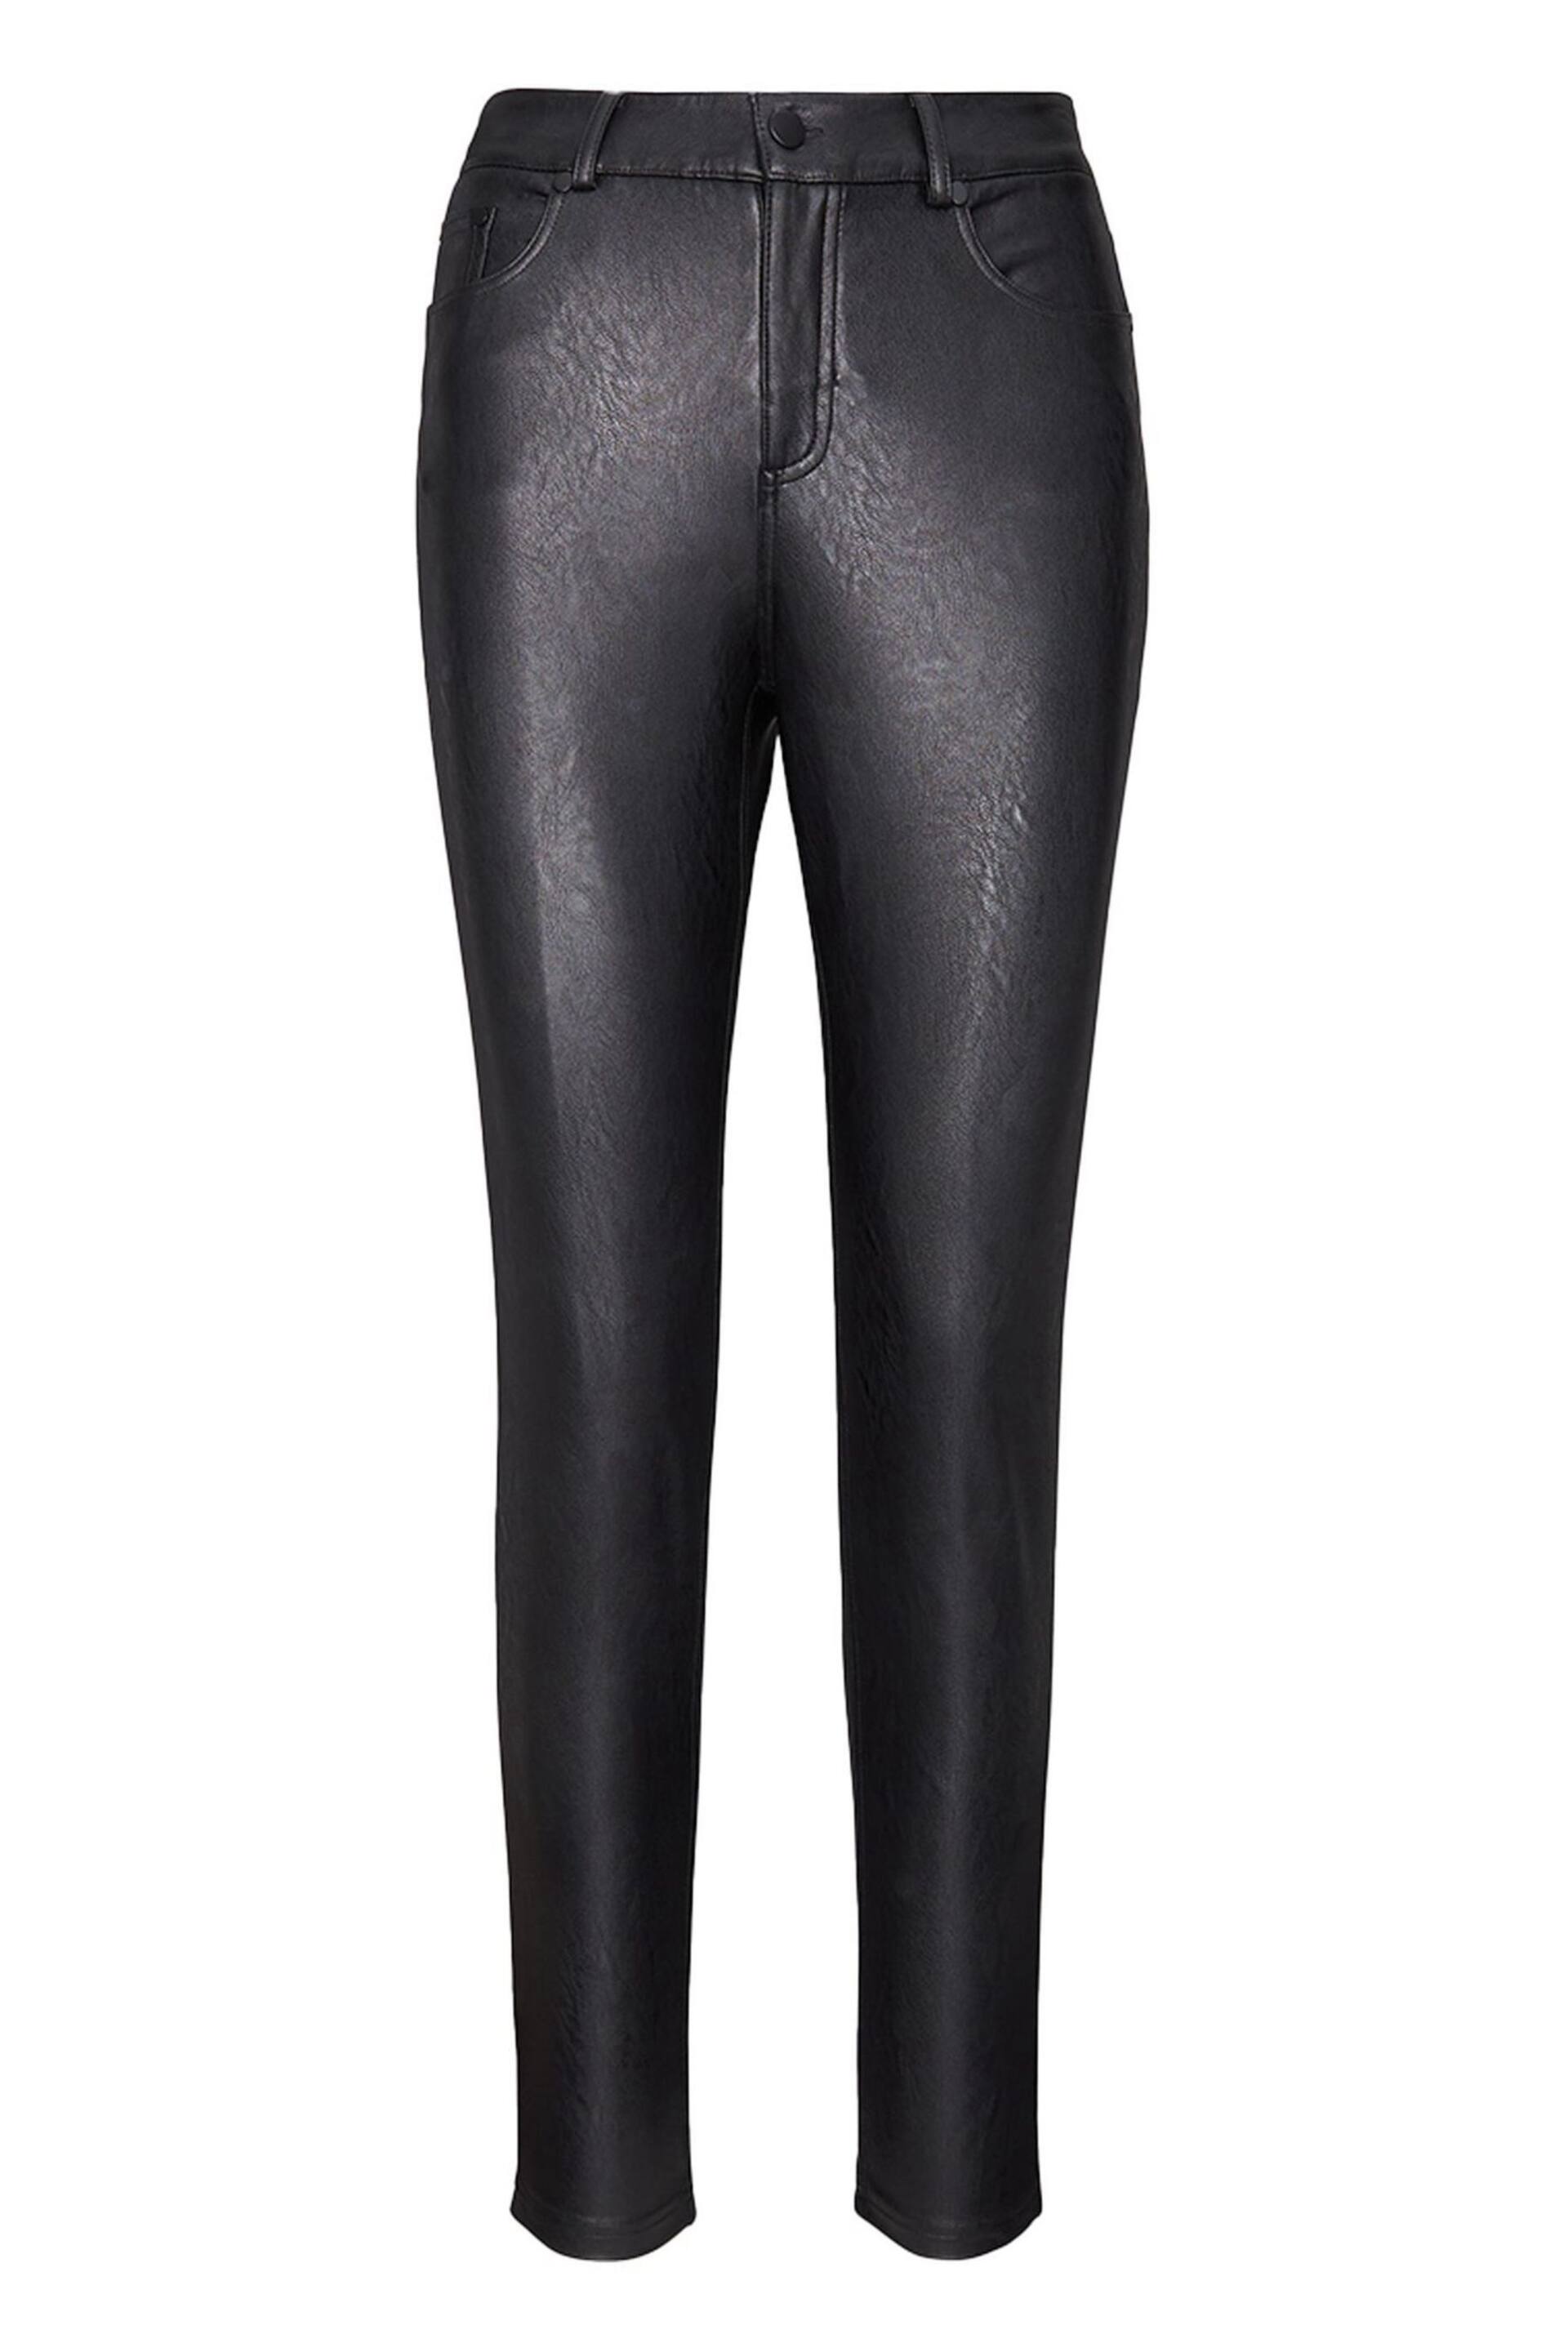 Commando 5 Pocket Faux Leather Trousers - Image 4 of 4